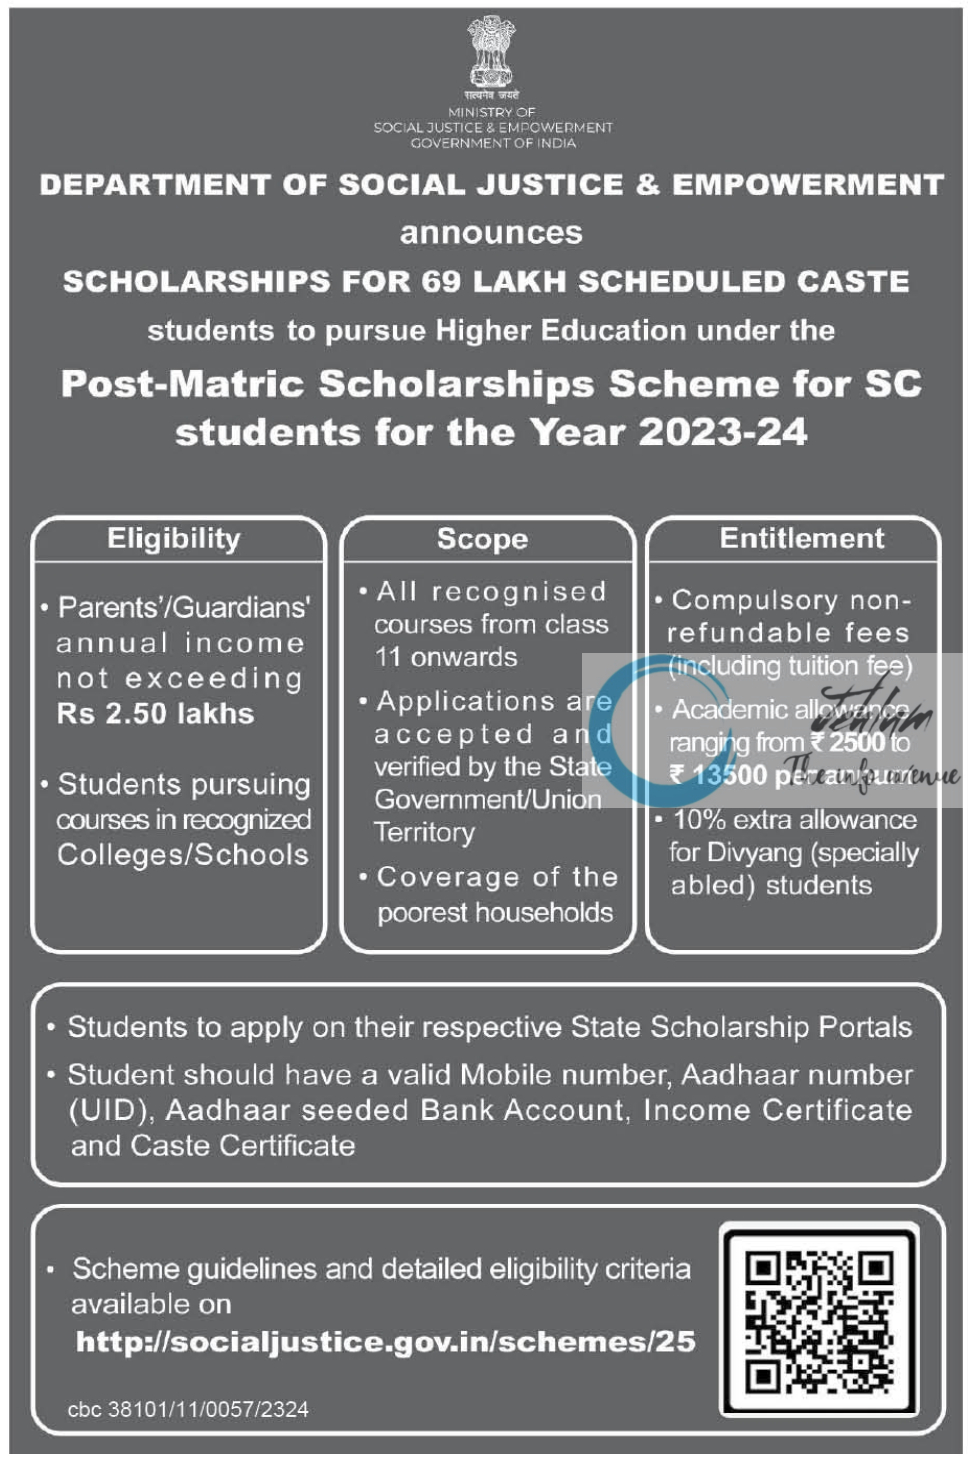 MINISTRY OF SOCIAL JUSTICE AND EMPOWERMENT POST-MATRIC SCHOLARSHIPS SCHEME FOR SC STUDENTS 2023-2024